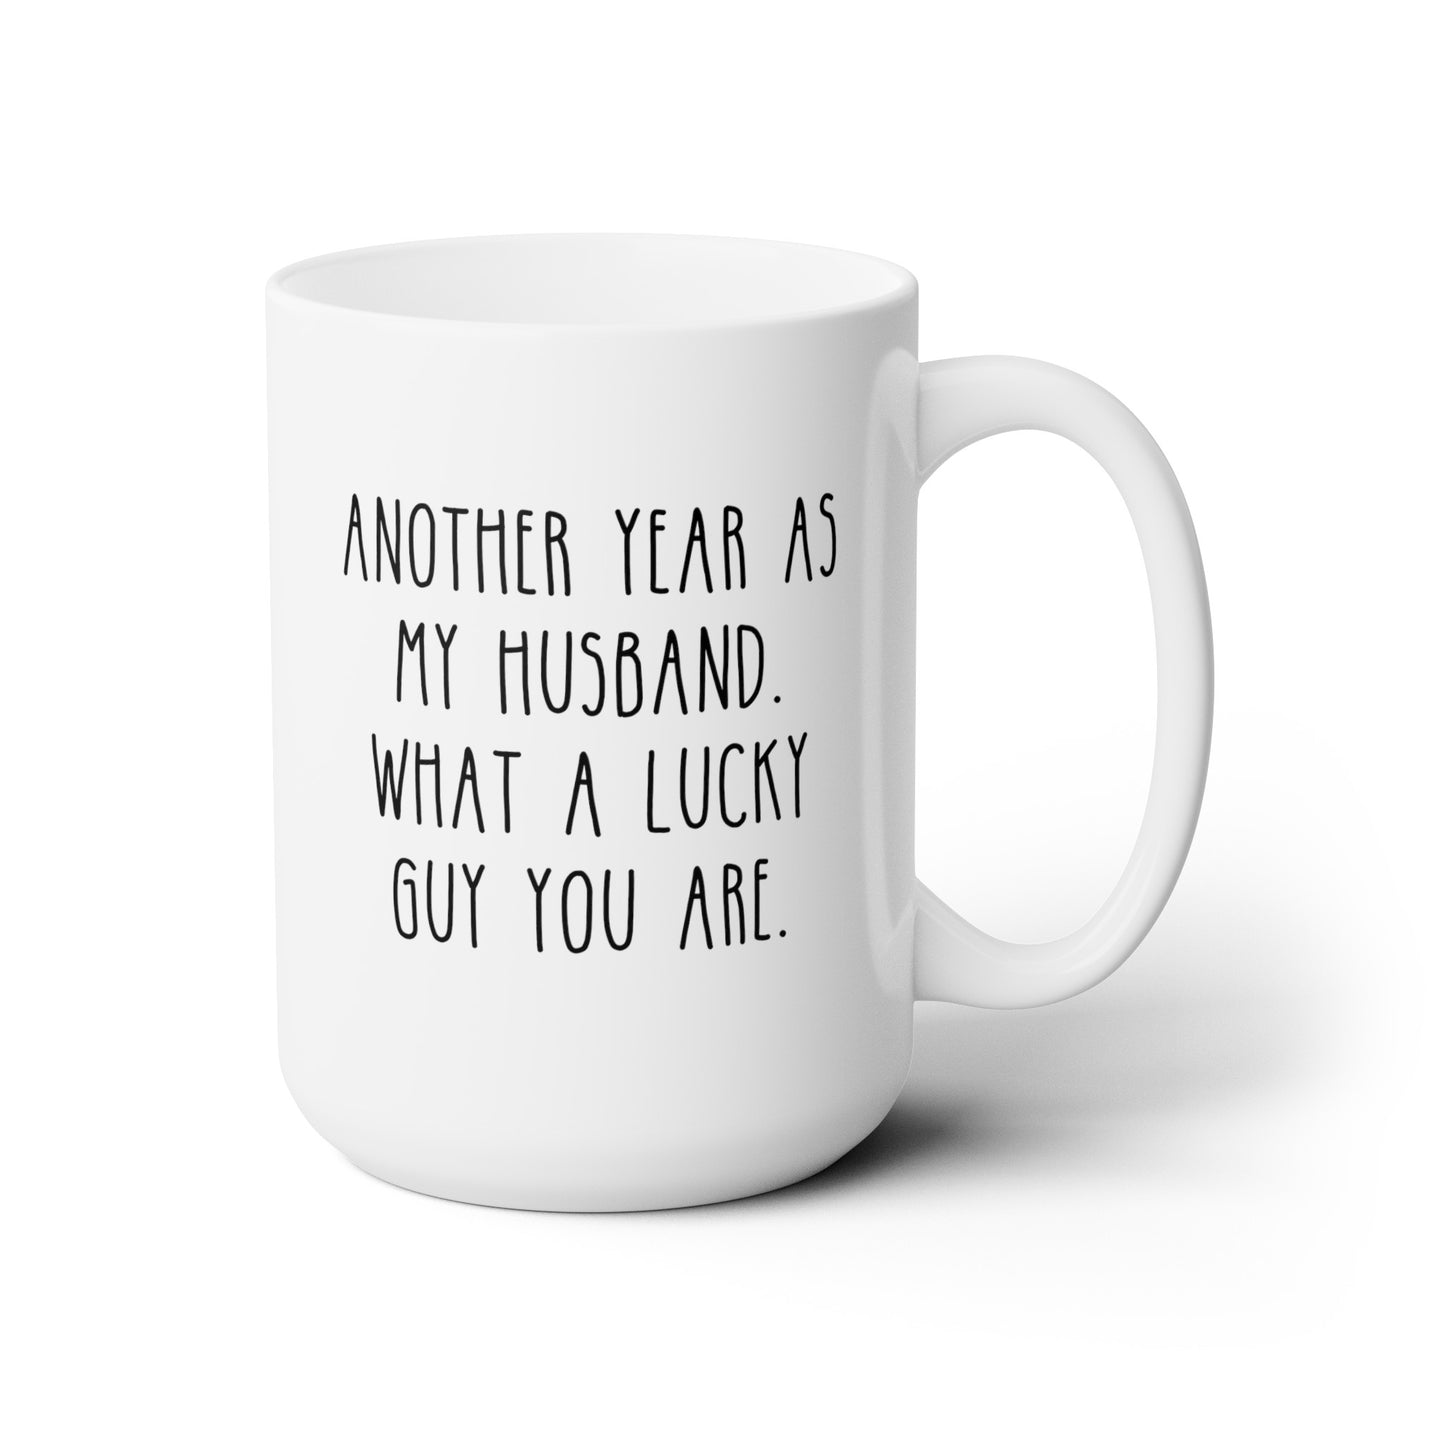 Another Year As My Husband What A Lucky Guy You Are 15oz white funny large coffee mug gift for Valentines sarcastic hubby fiance wedding anniversary waveywares wavey wares wavywares wavy wares